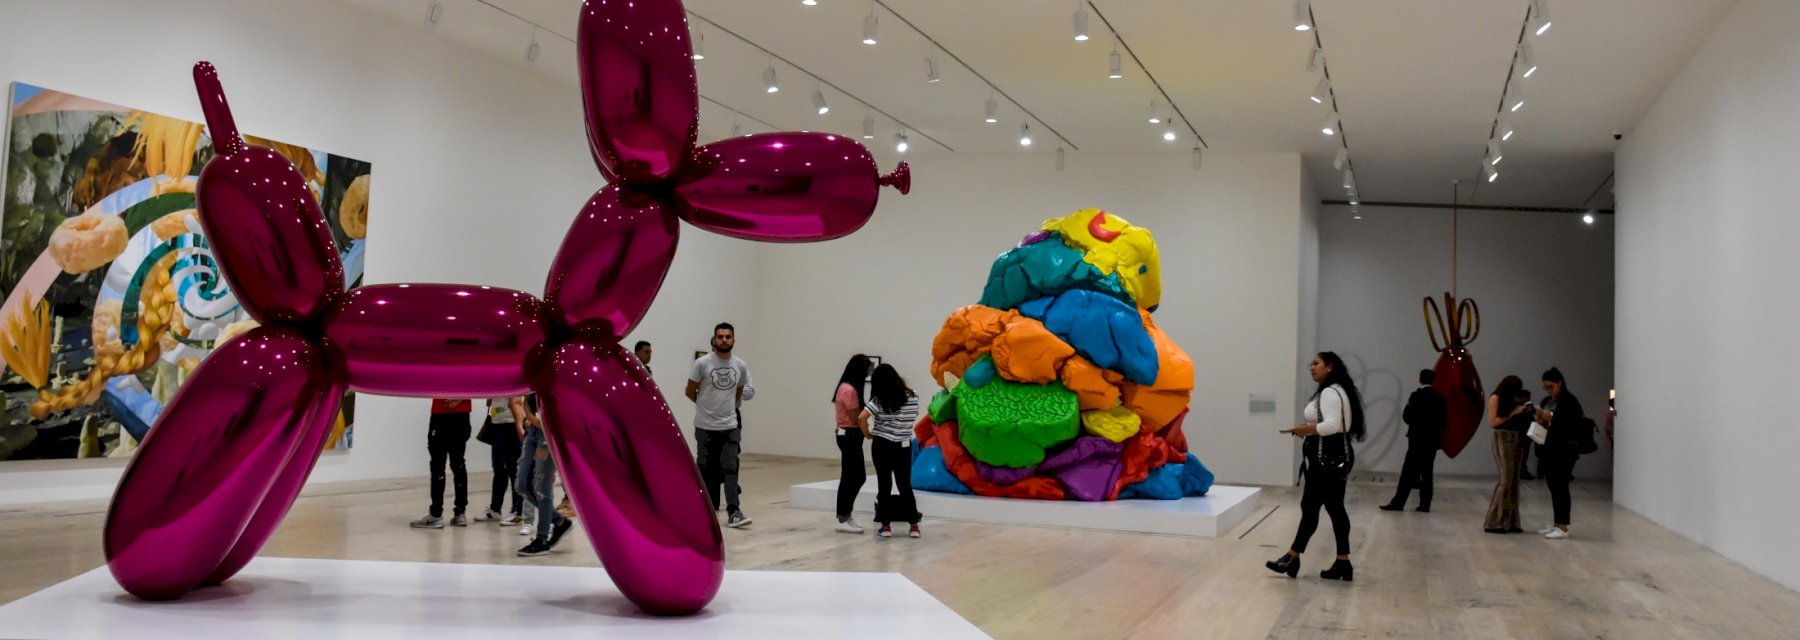 Jeff Koons’ 7 most famous works